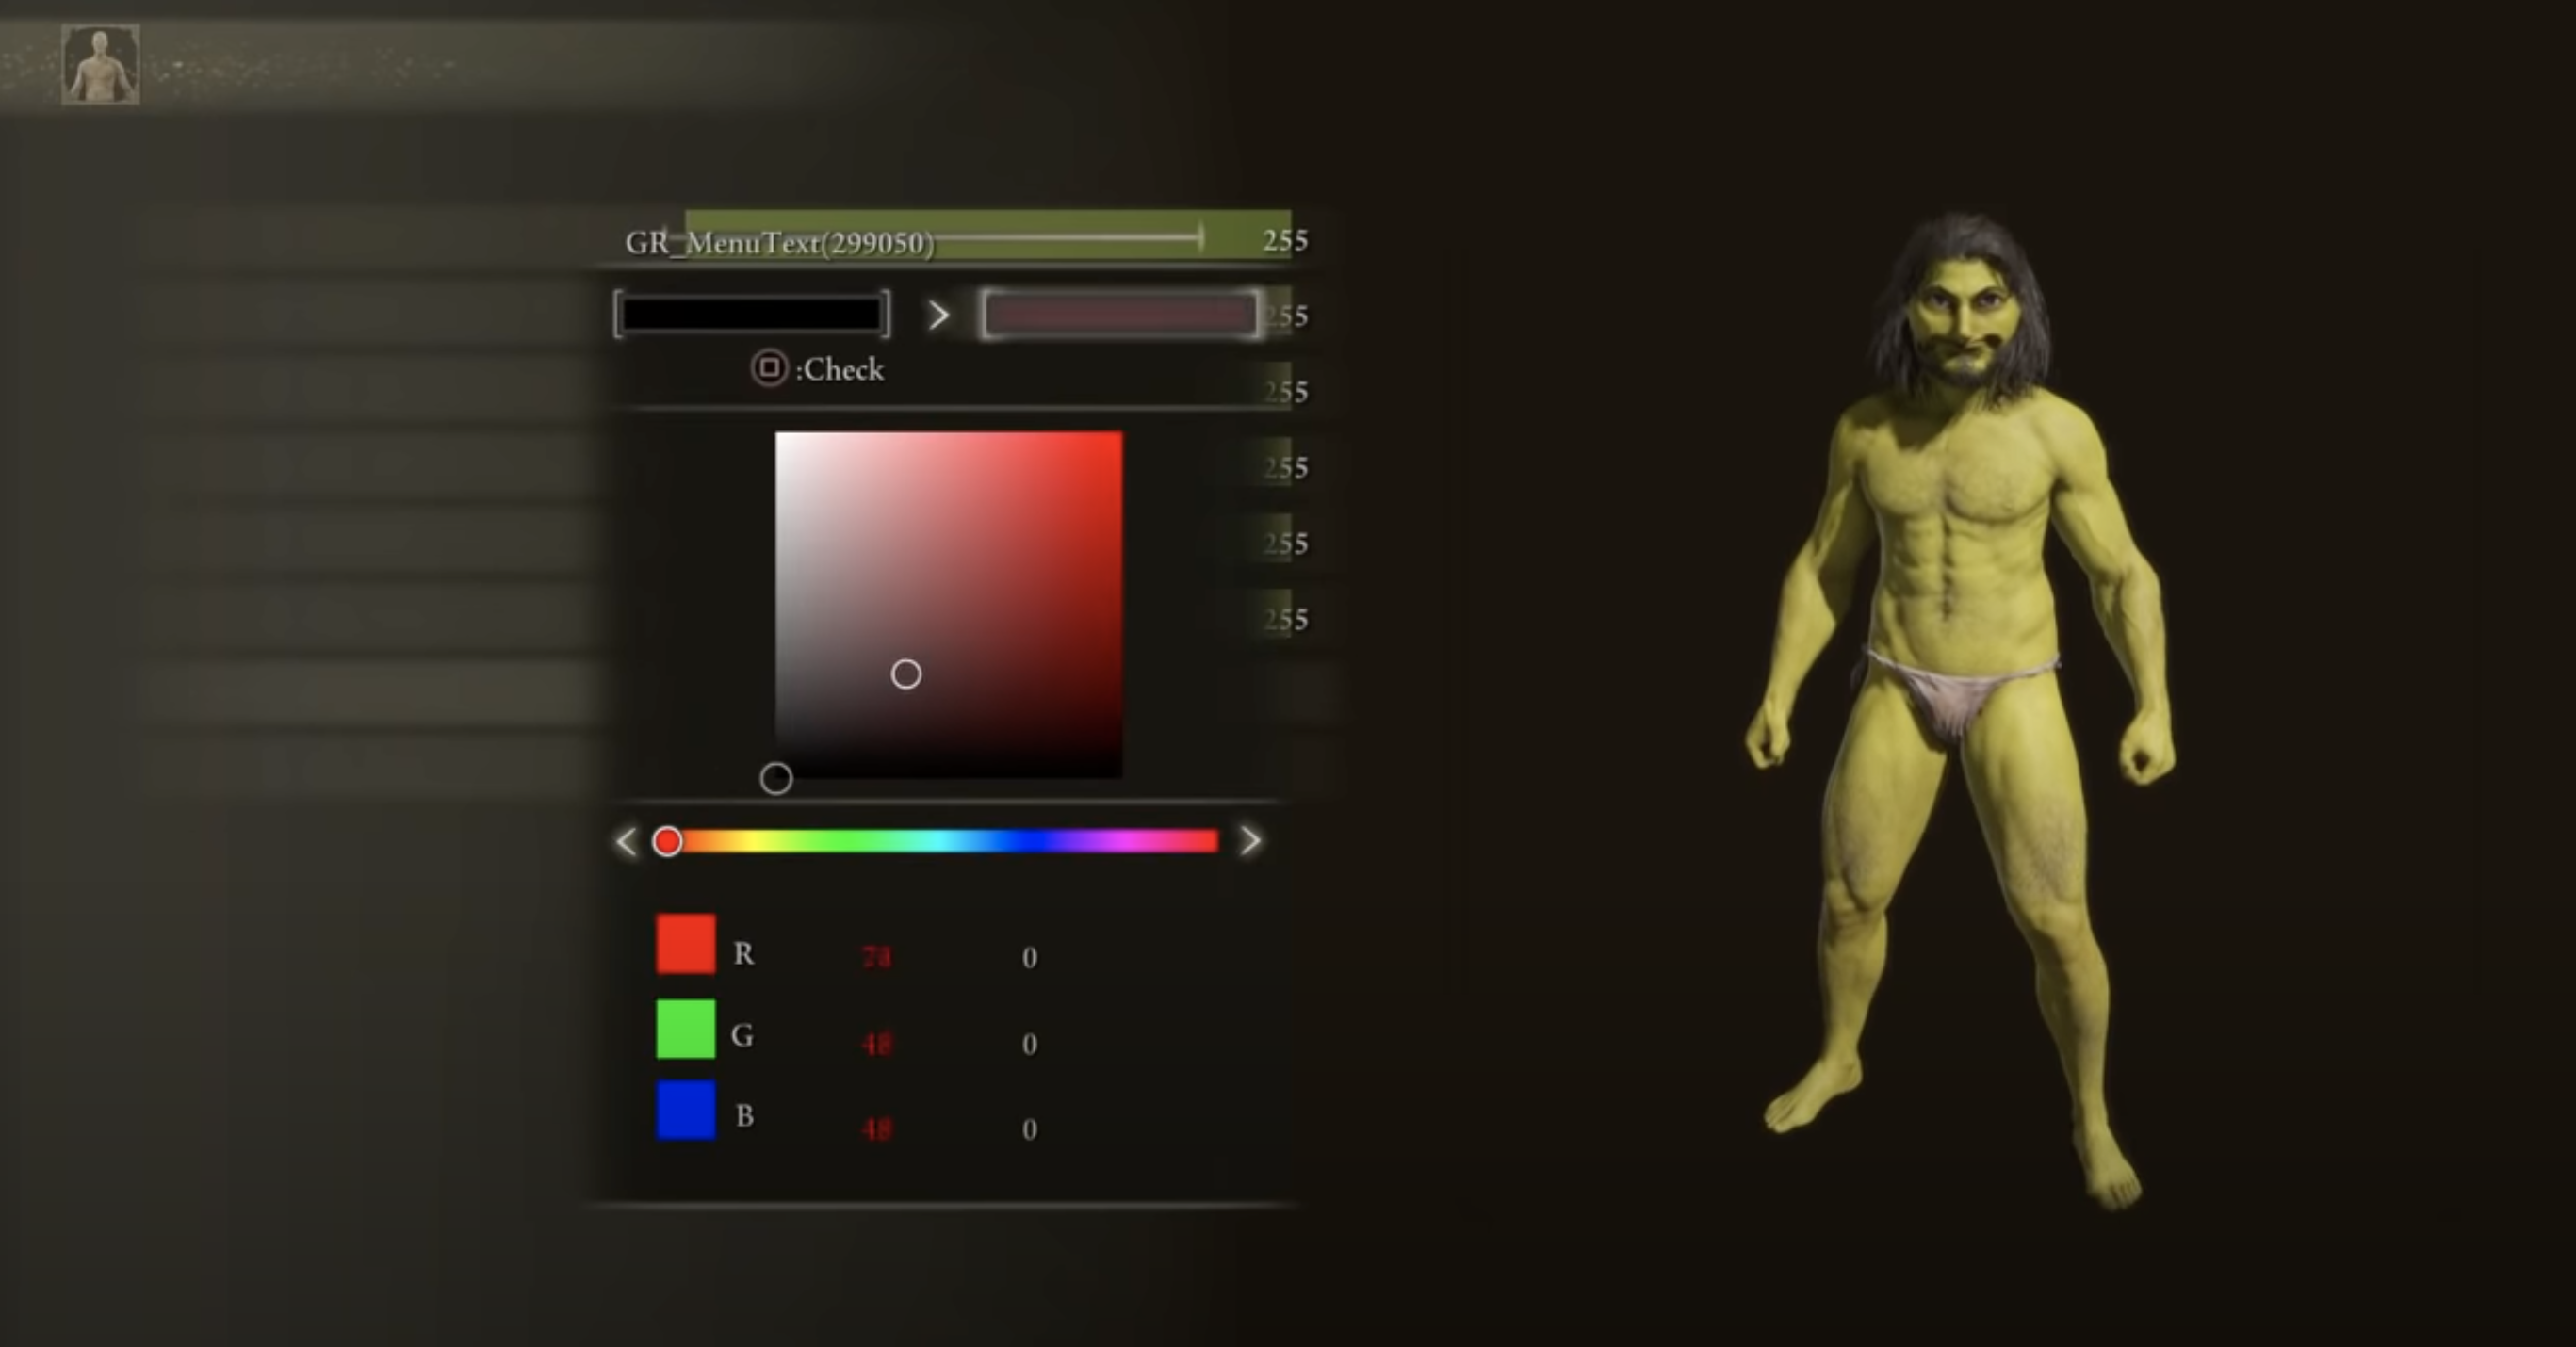 Elden Ring's character creation screen has reportedly leaked online thumbnail